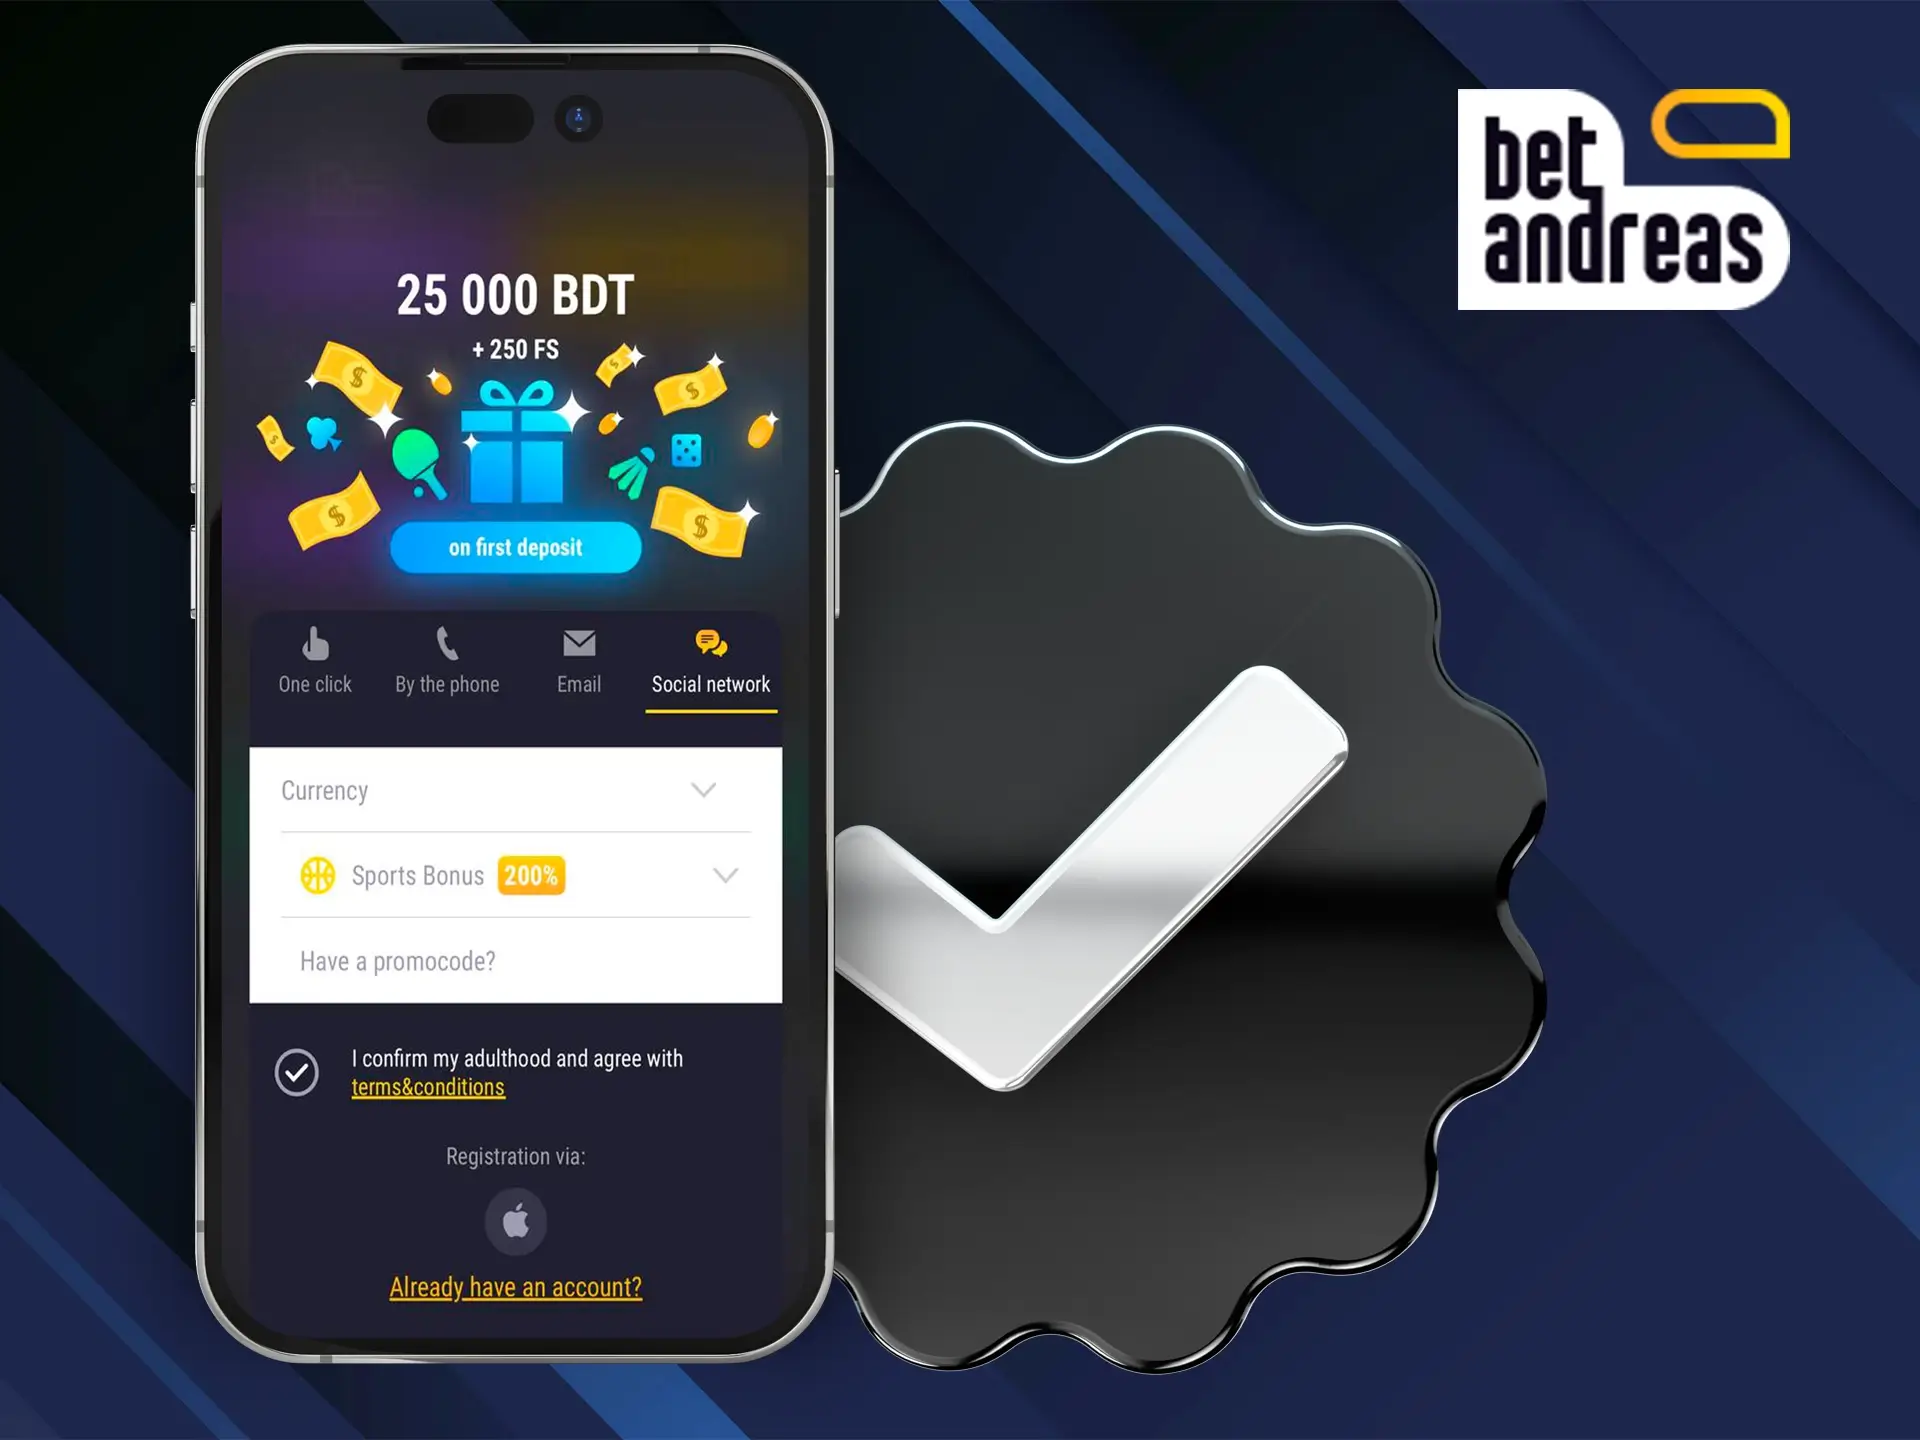 In the BetAndreas app you'll find 4 ways to register, from the simplest one-click registration to a full form with all the details.